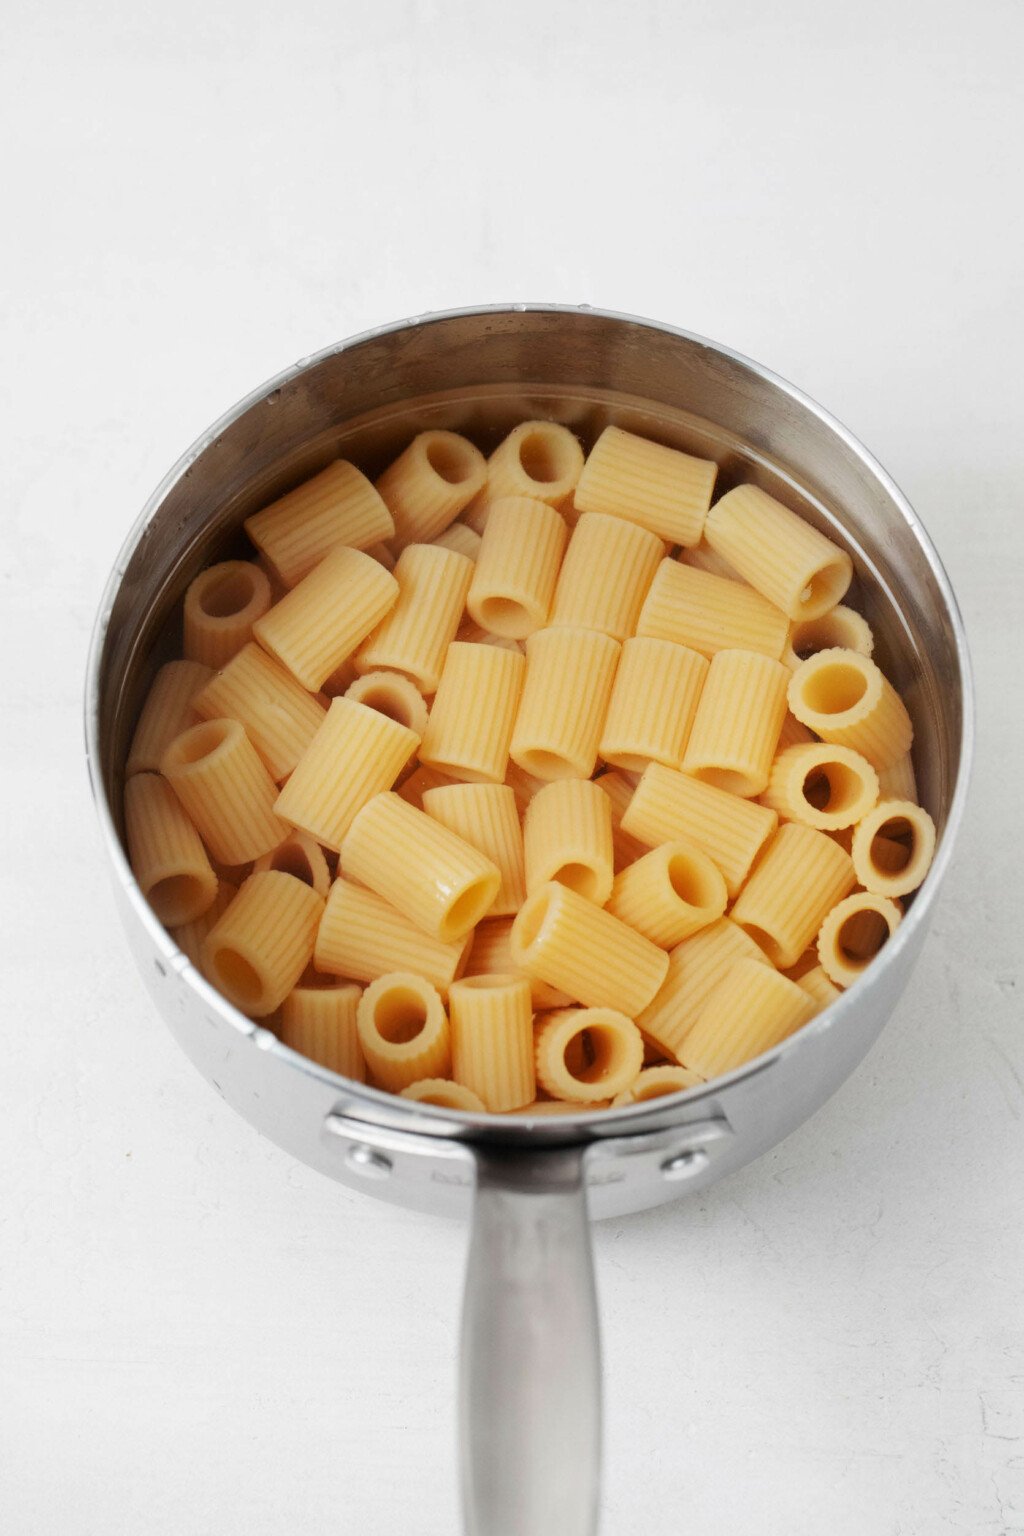 A stainless steel sauce pot is filled with cooked rigatoni. It rests on a white surface.